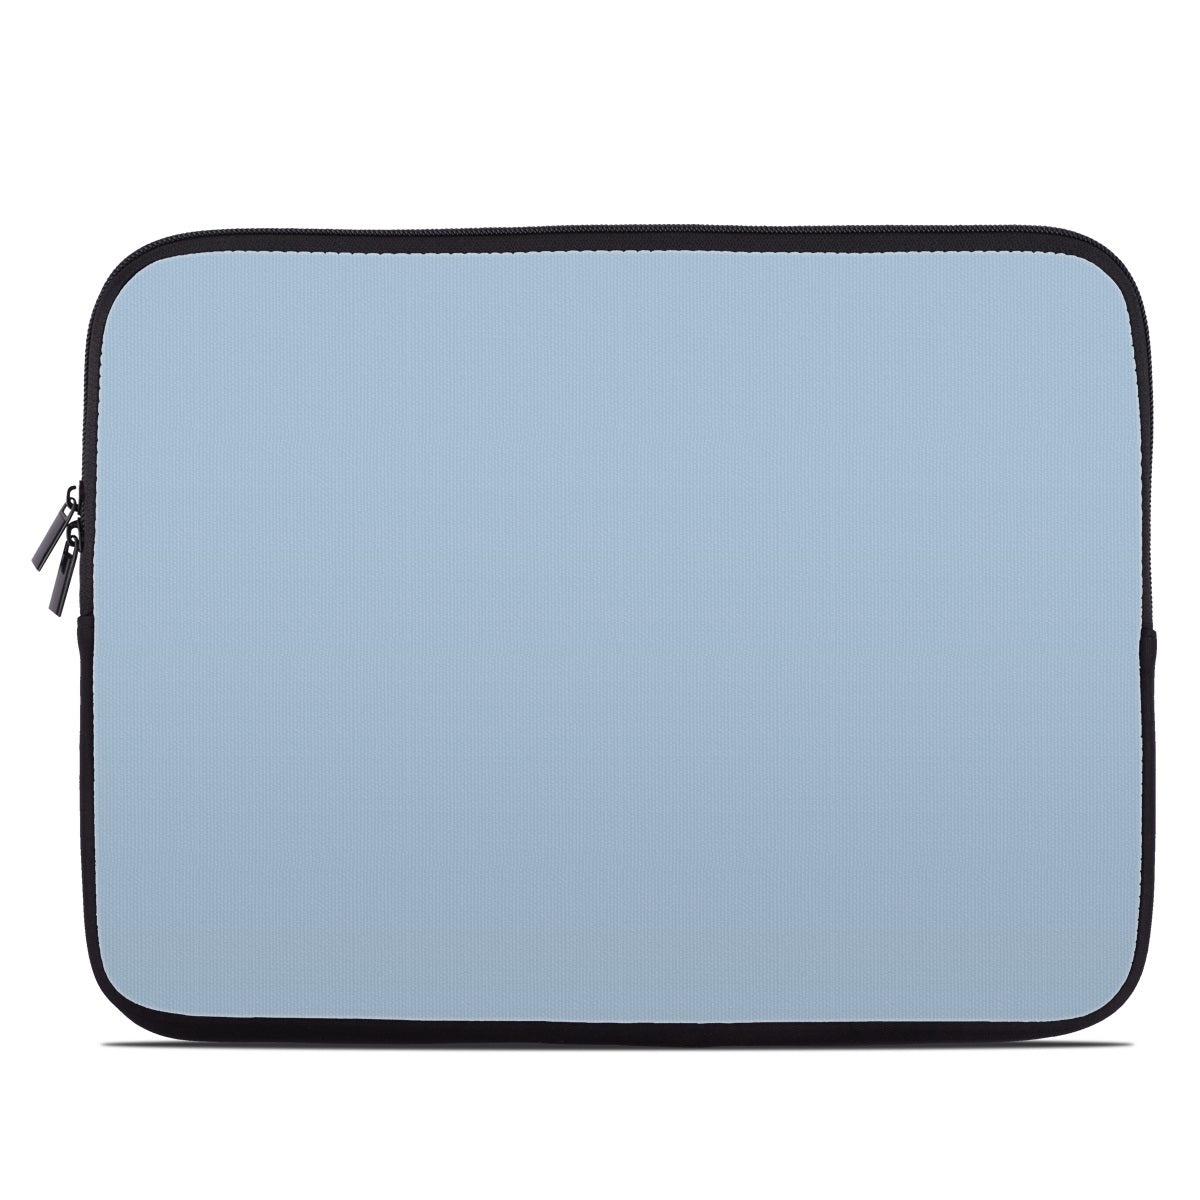 Solid State Blue Mist - Laptop Sleeve